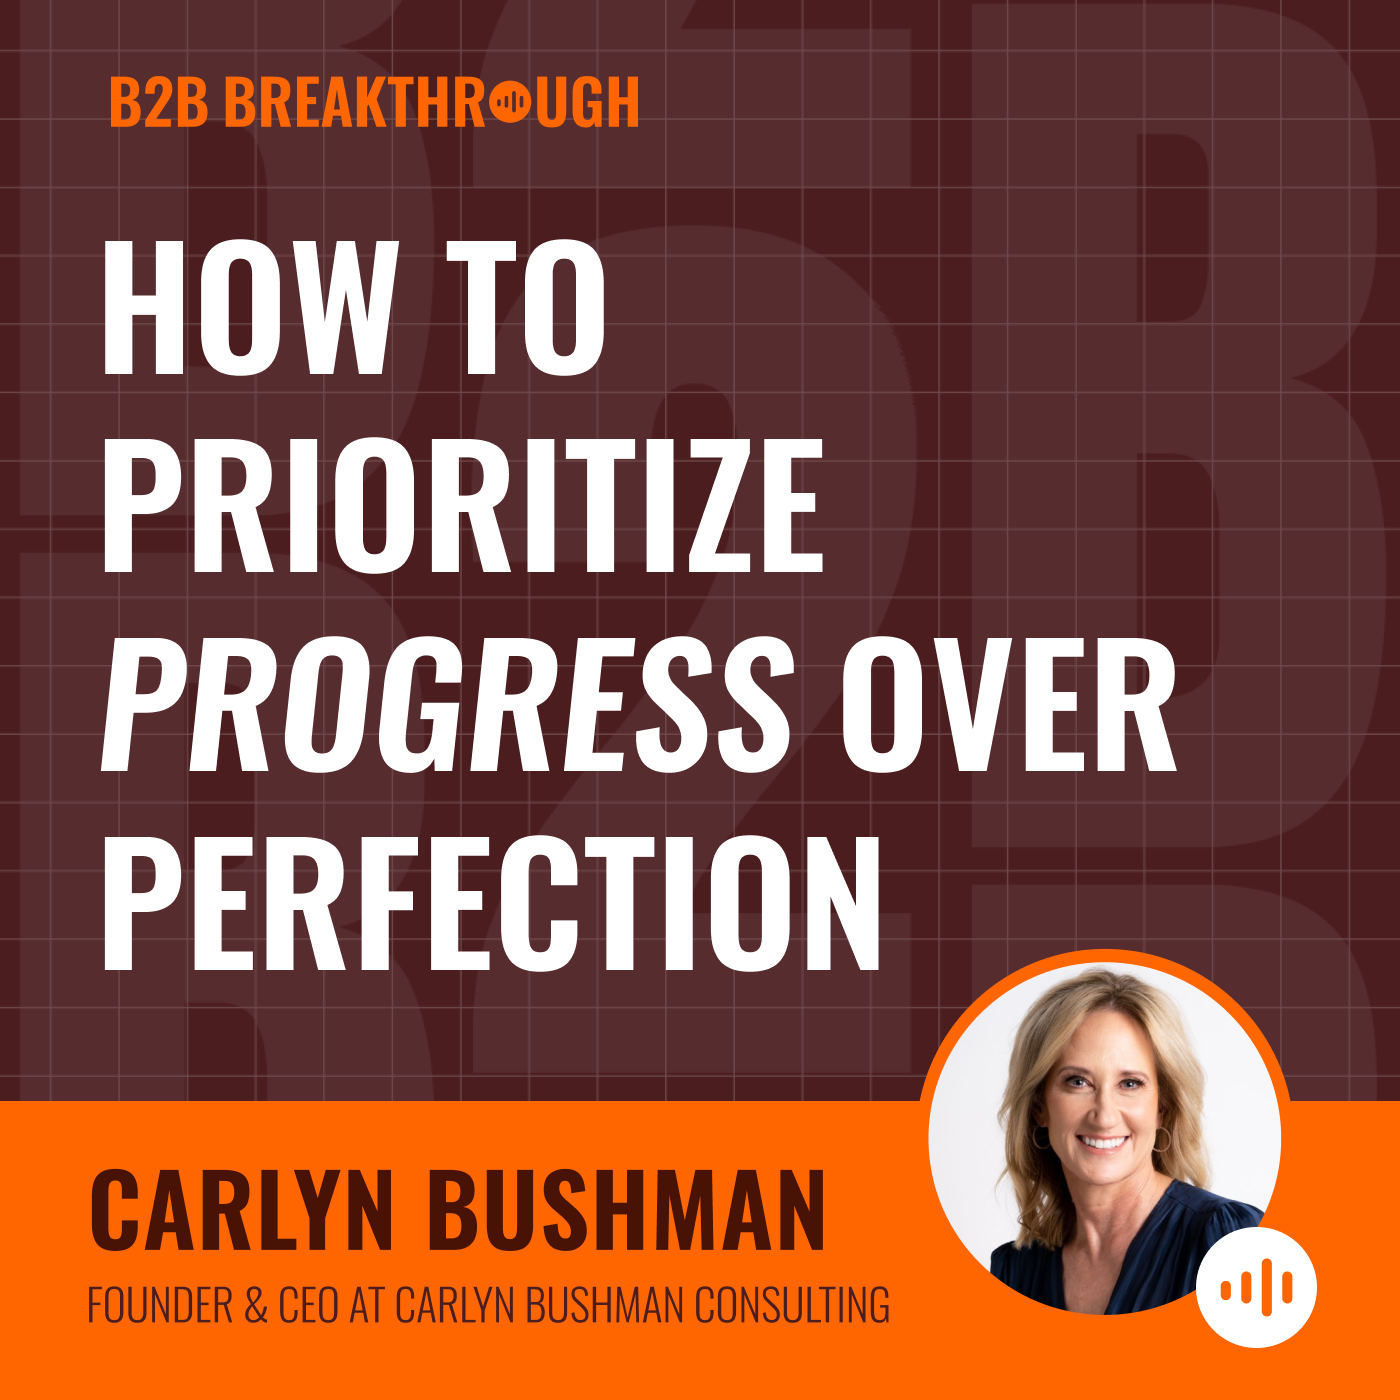 How to Prioritize Progress Over Perfection: Insights from Carlyn Bushman